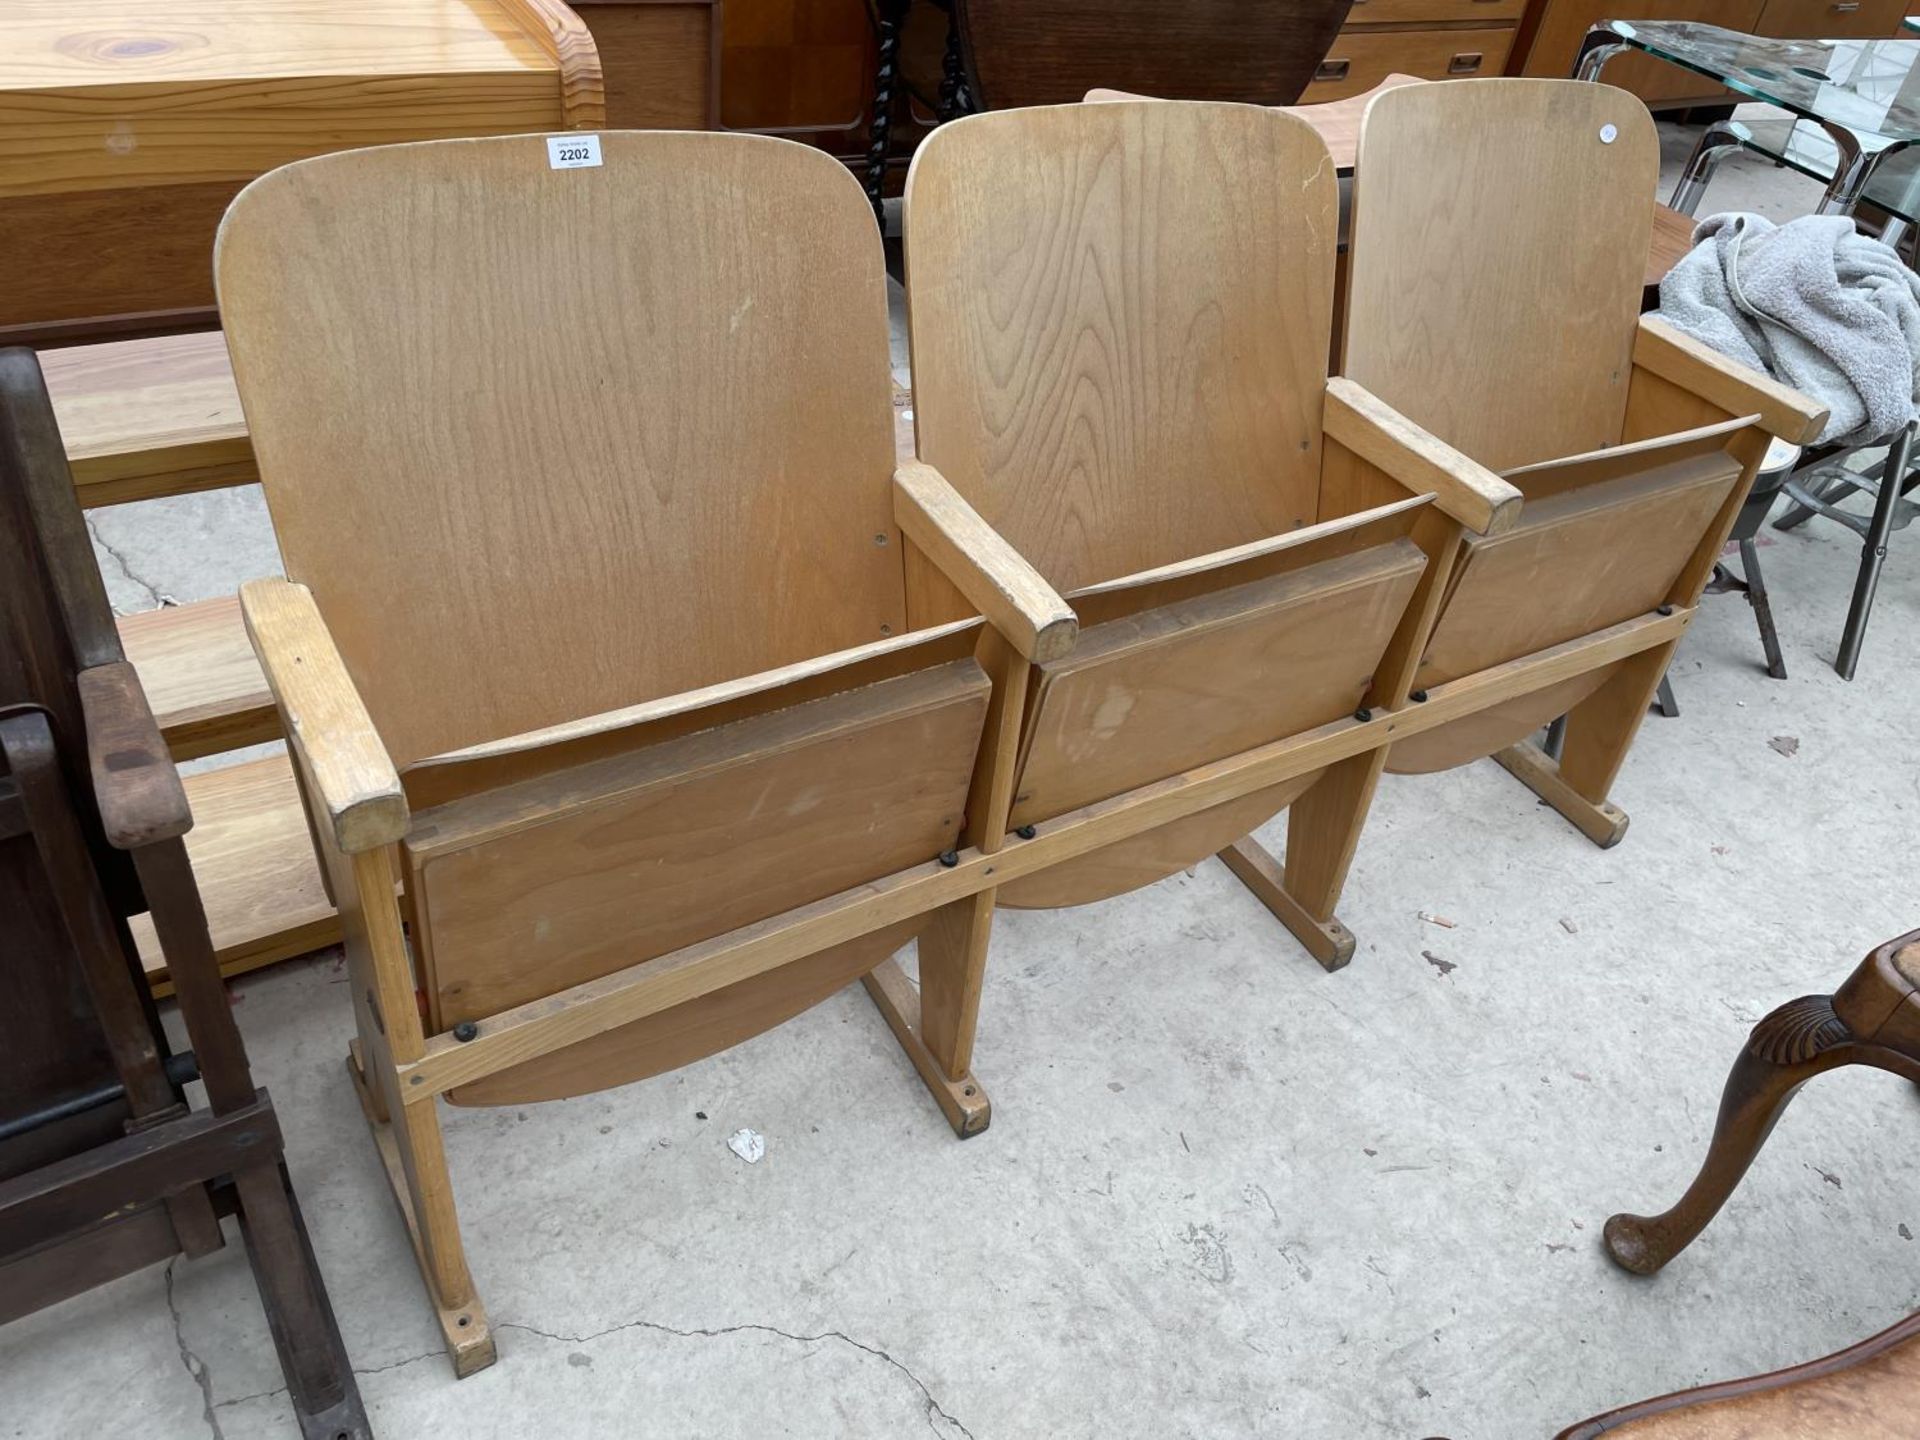 THREE BENTWOOD CINEMA/THEATRE SEATS, NOT NUMBERED